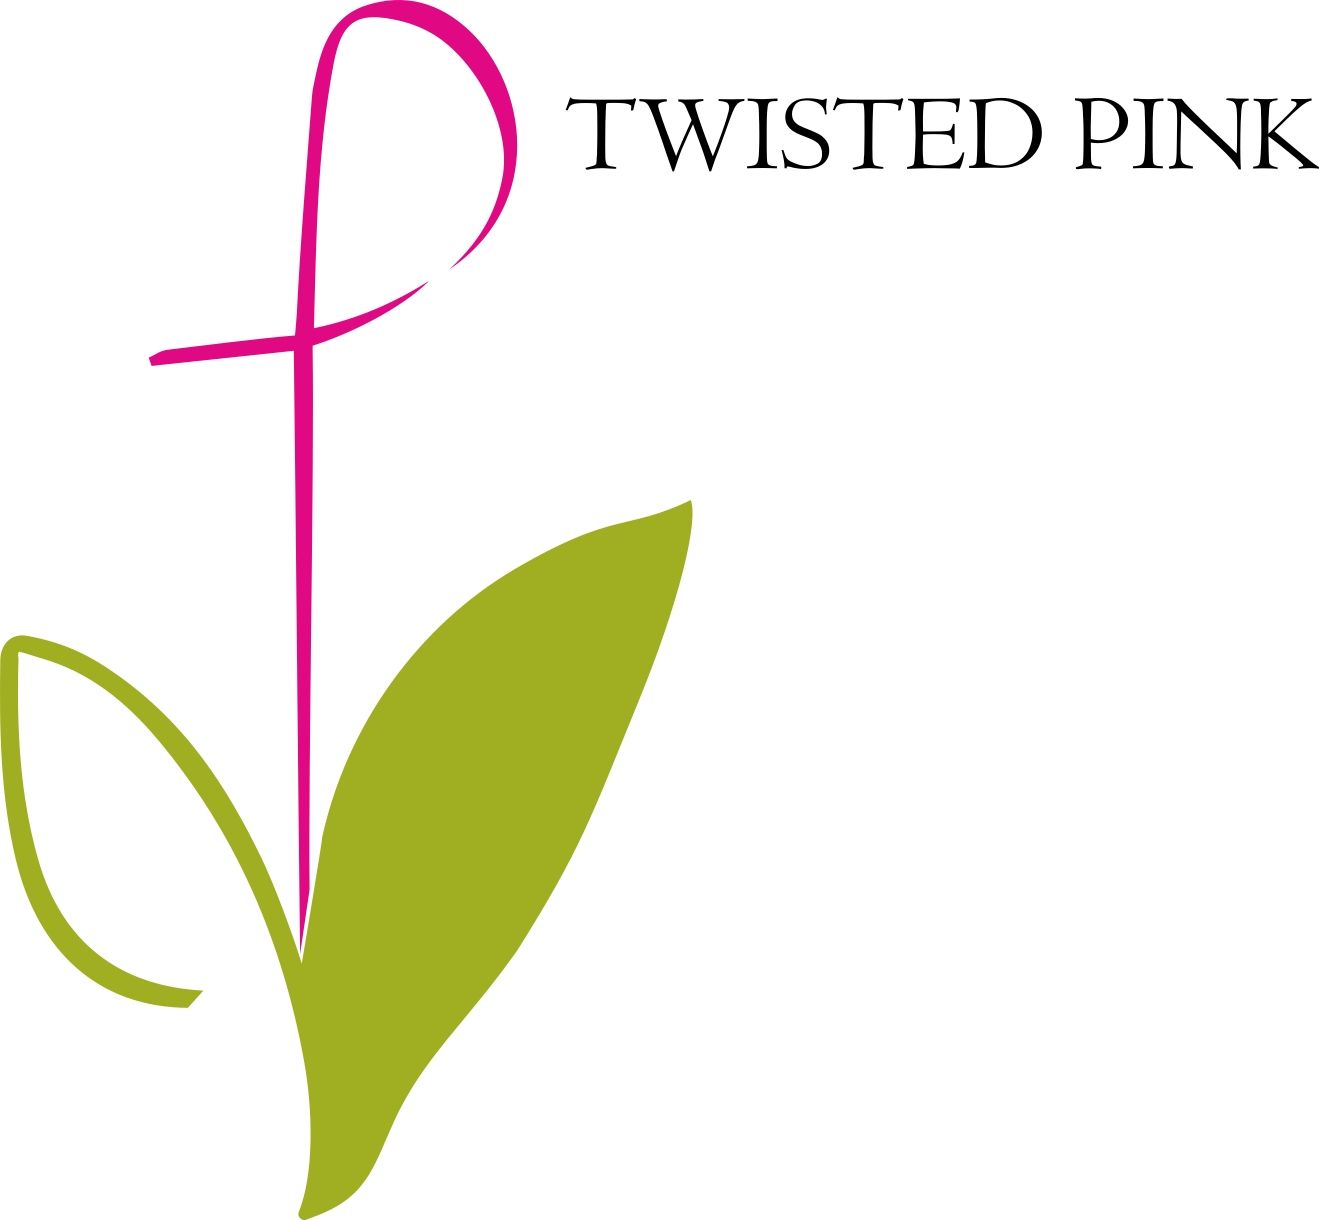 Twisted Pink